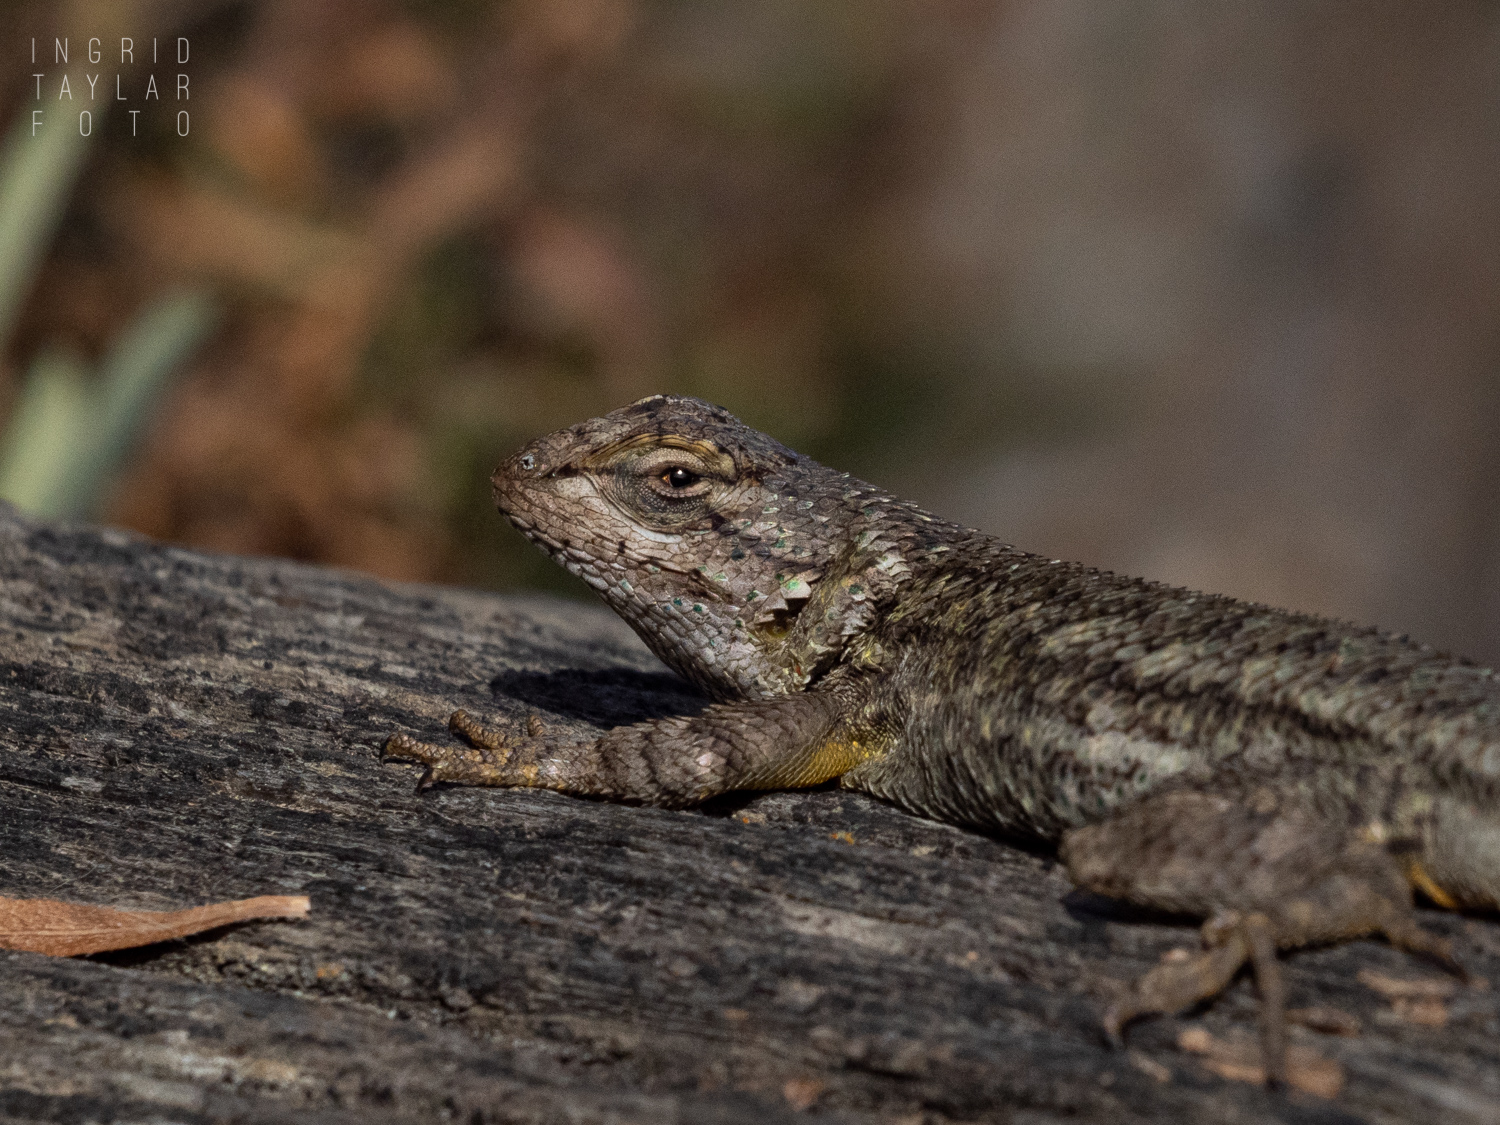 Western Fence Lizard at Bolsa Chica Ecological Reserve